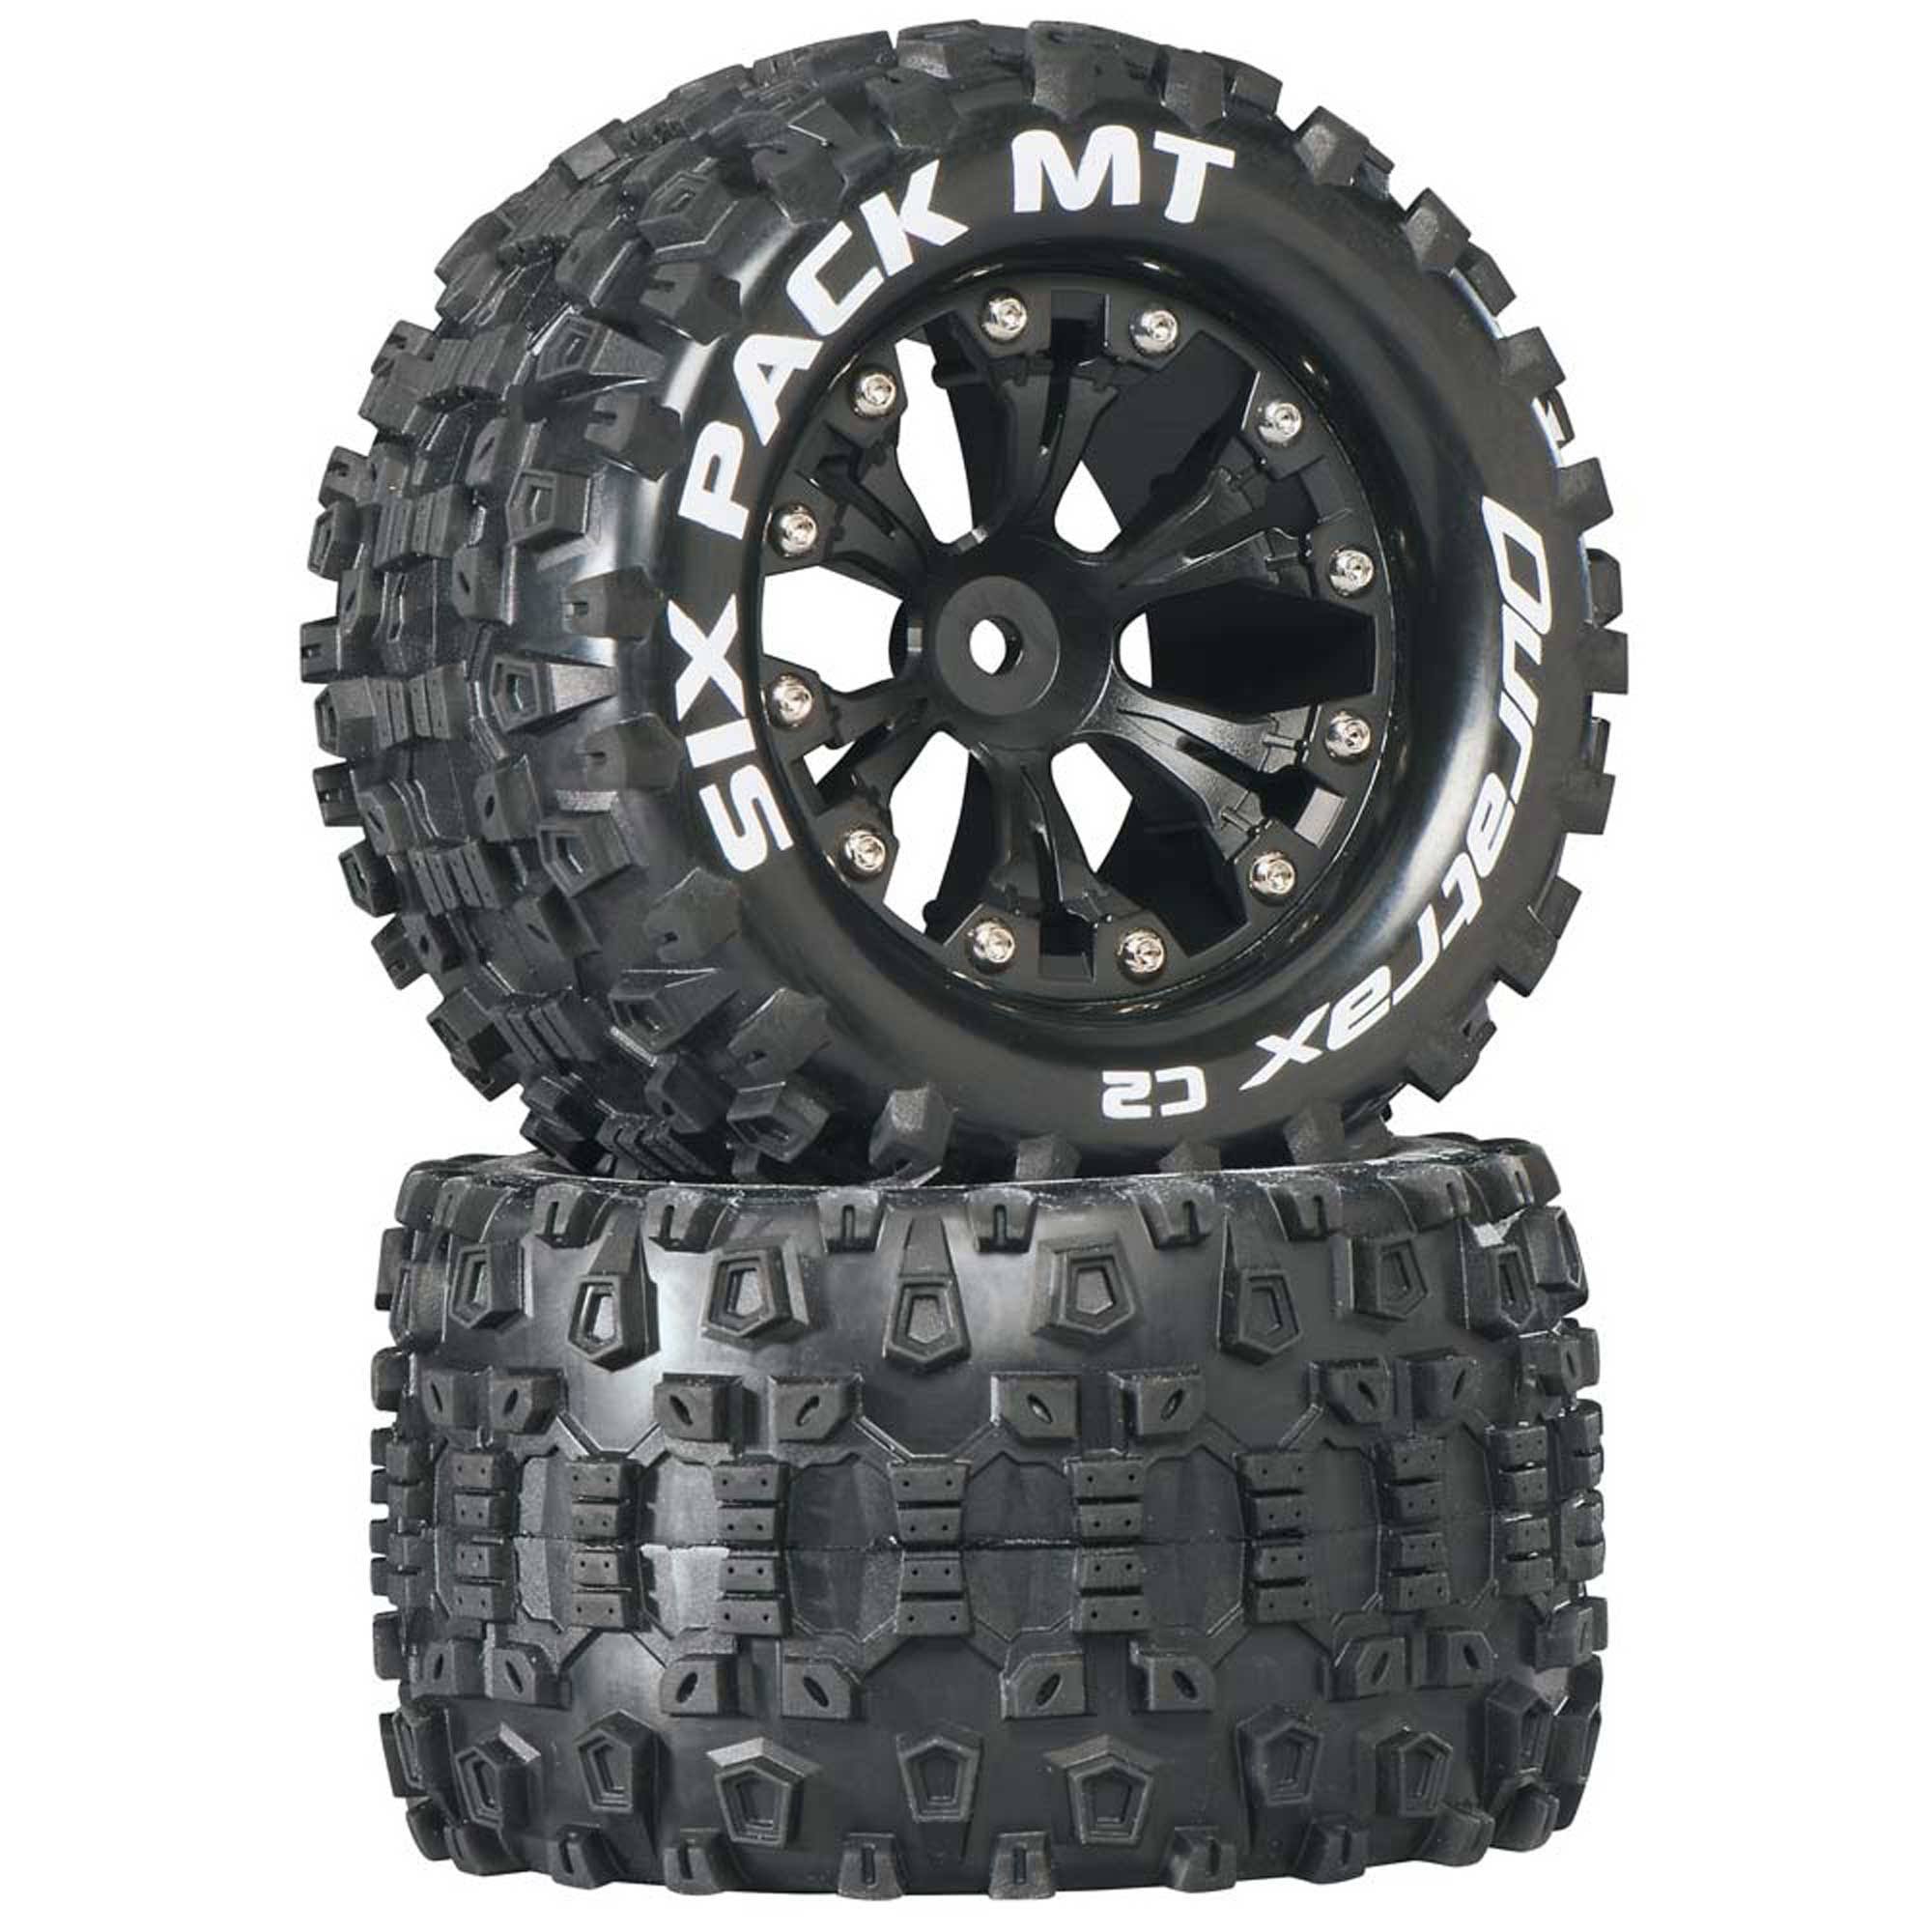 Duratrax Sixpack MT 2.8 Truck 2WD Mounted Re C2 Tires